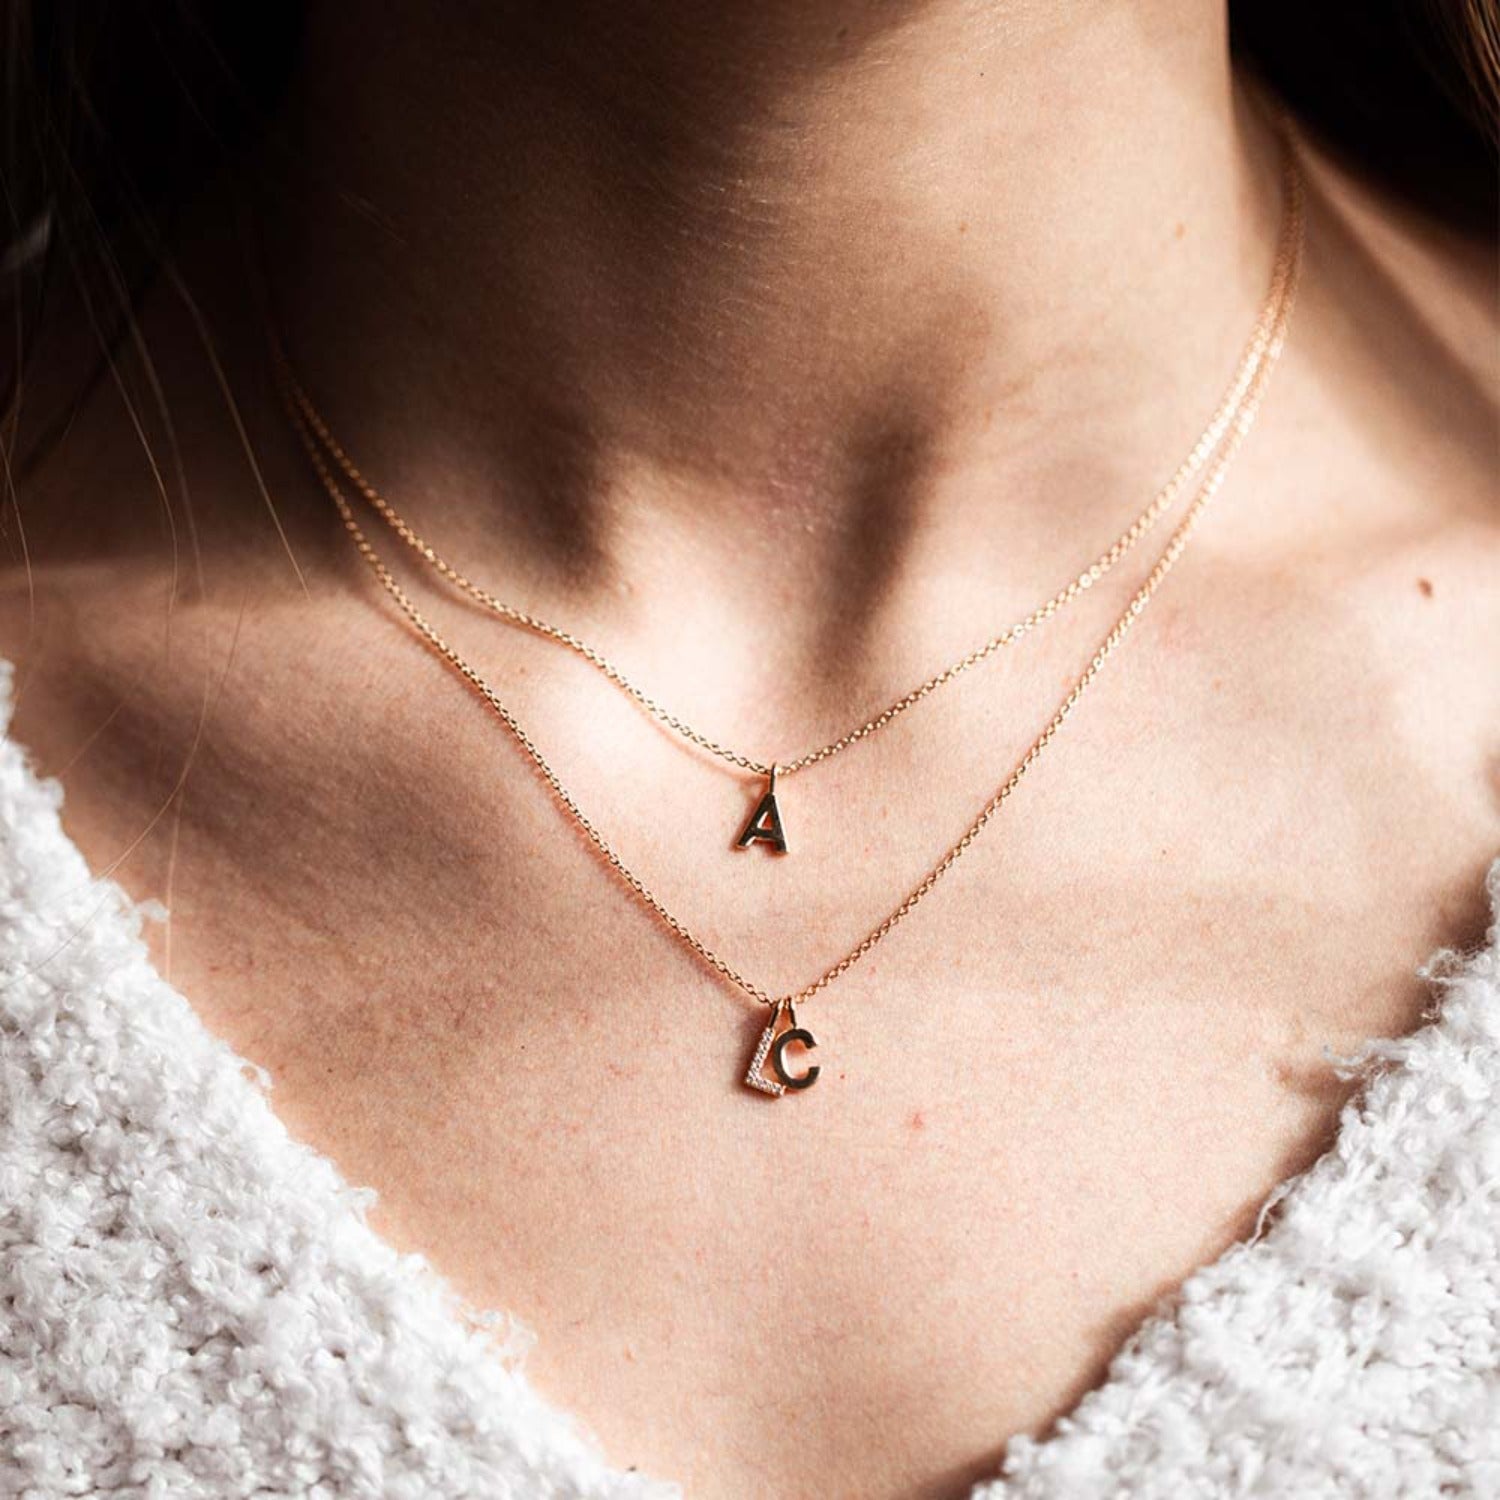 Small Sideways Initial Letter Necklace, Capital Letter Alphabet  Personalized Necklace Jewelry, Gold Monogram Letter Necklace,valentines  Gift - Etsy | Collar de carta, Collares de joyas, Iniciales